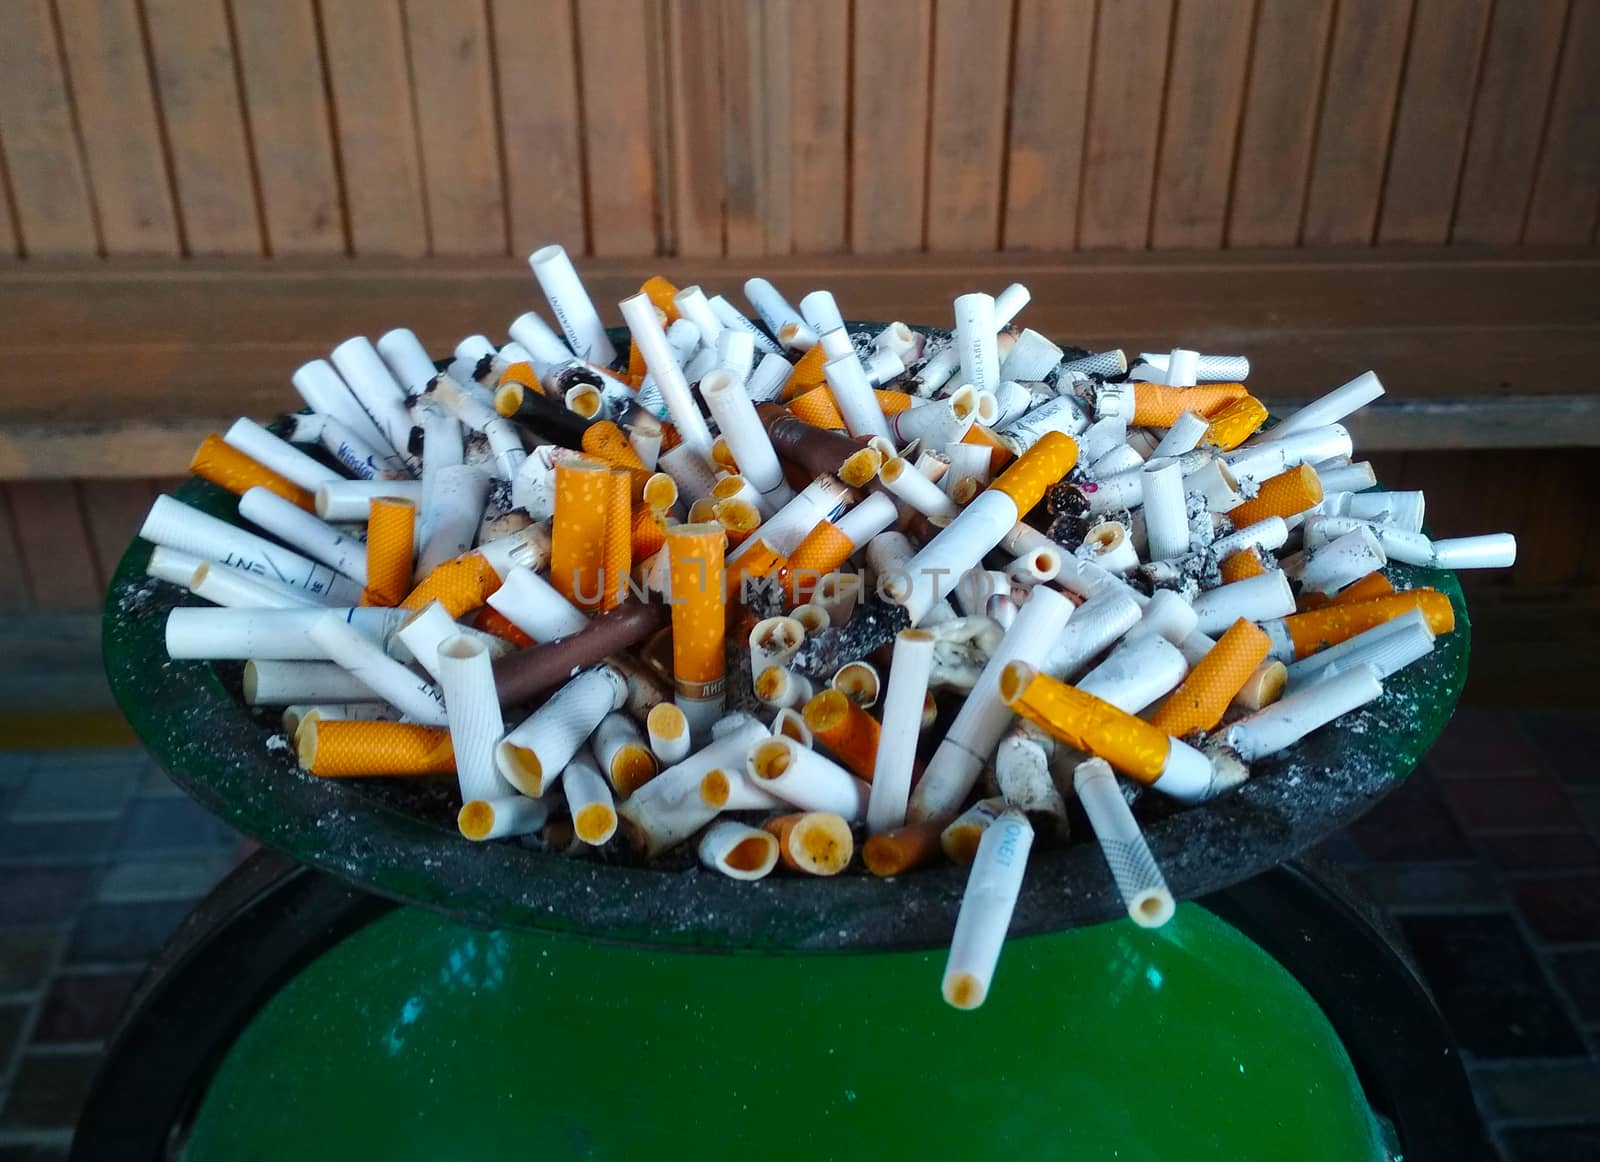 Large ashtray with cigarette butts of different colors. by Igor2006